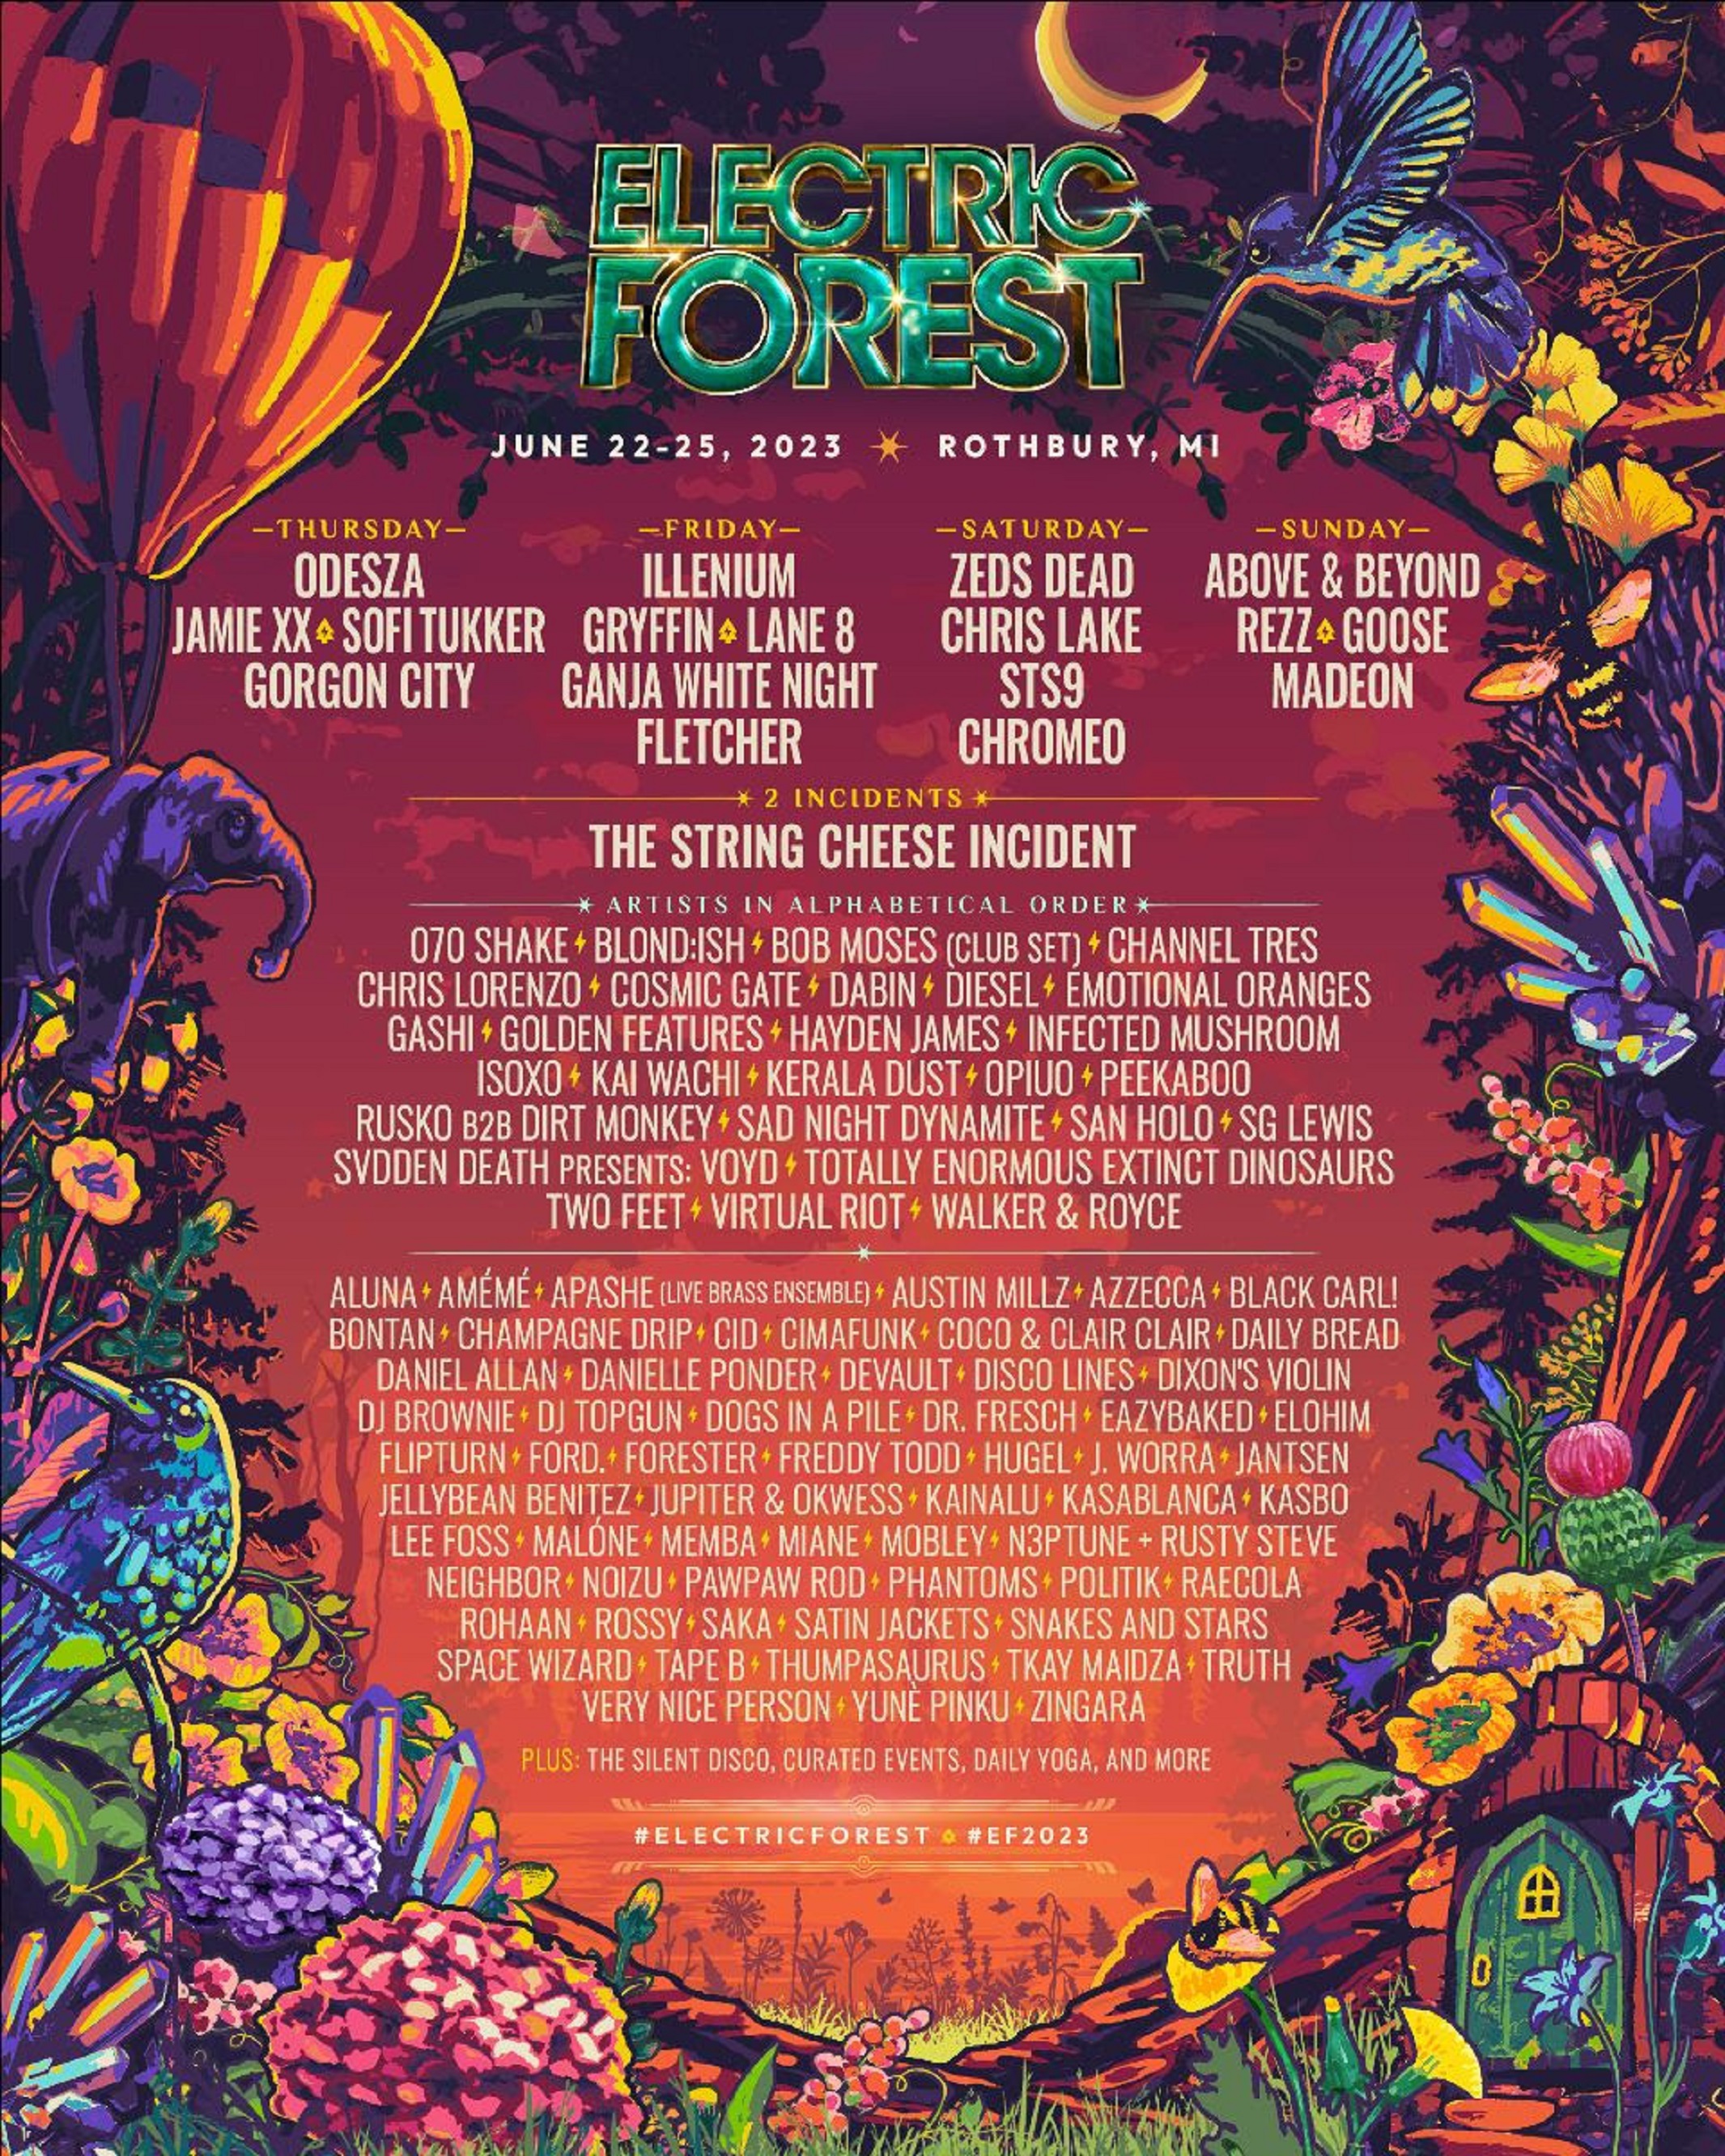 Electric Forest Announces Additional Artists to 2023 Festival Lineup